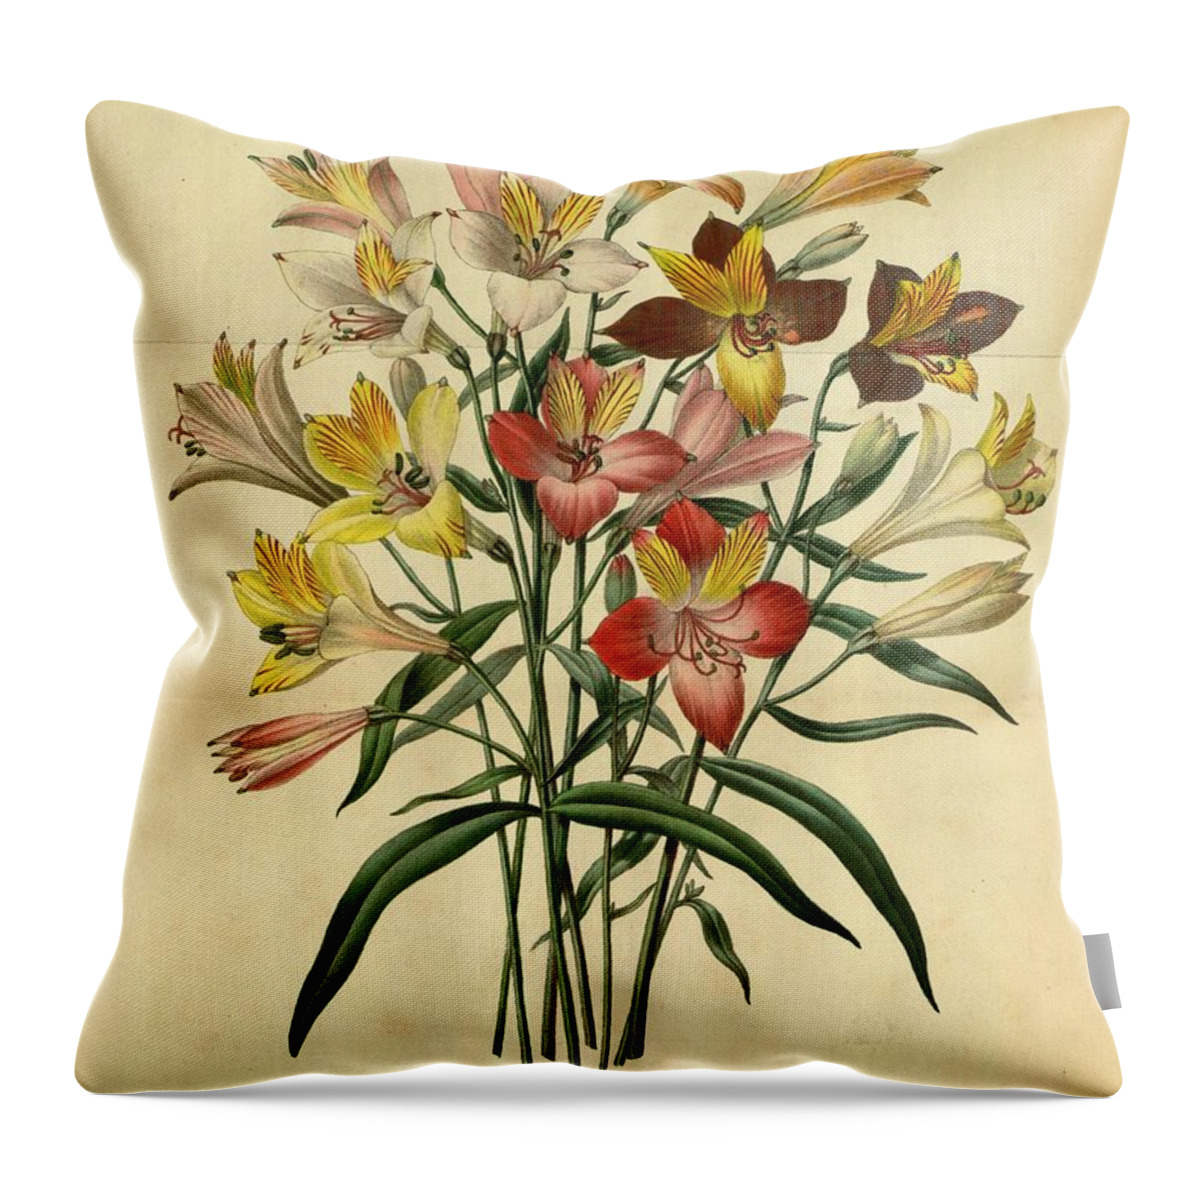 Orchid Throw Pillow featuring the mixed media Vintage Flower #38 by World Art Collective